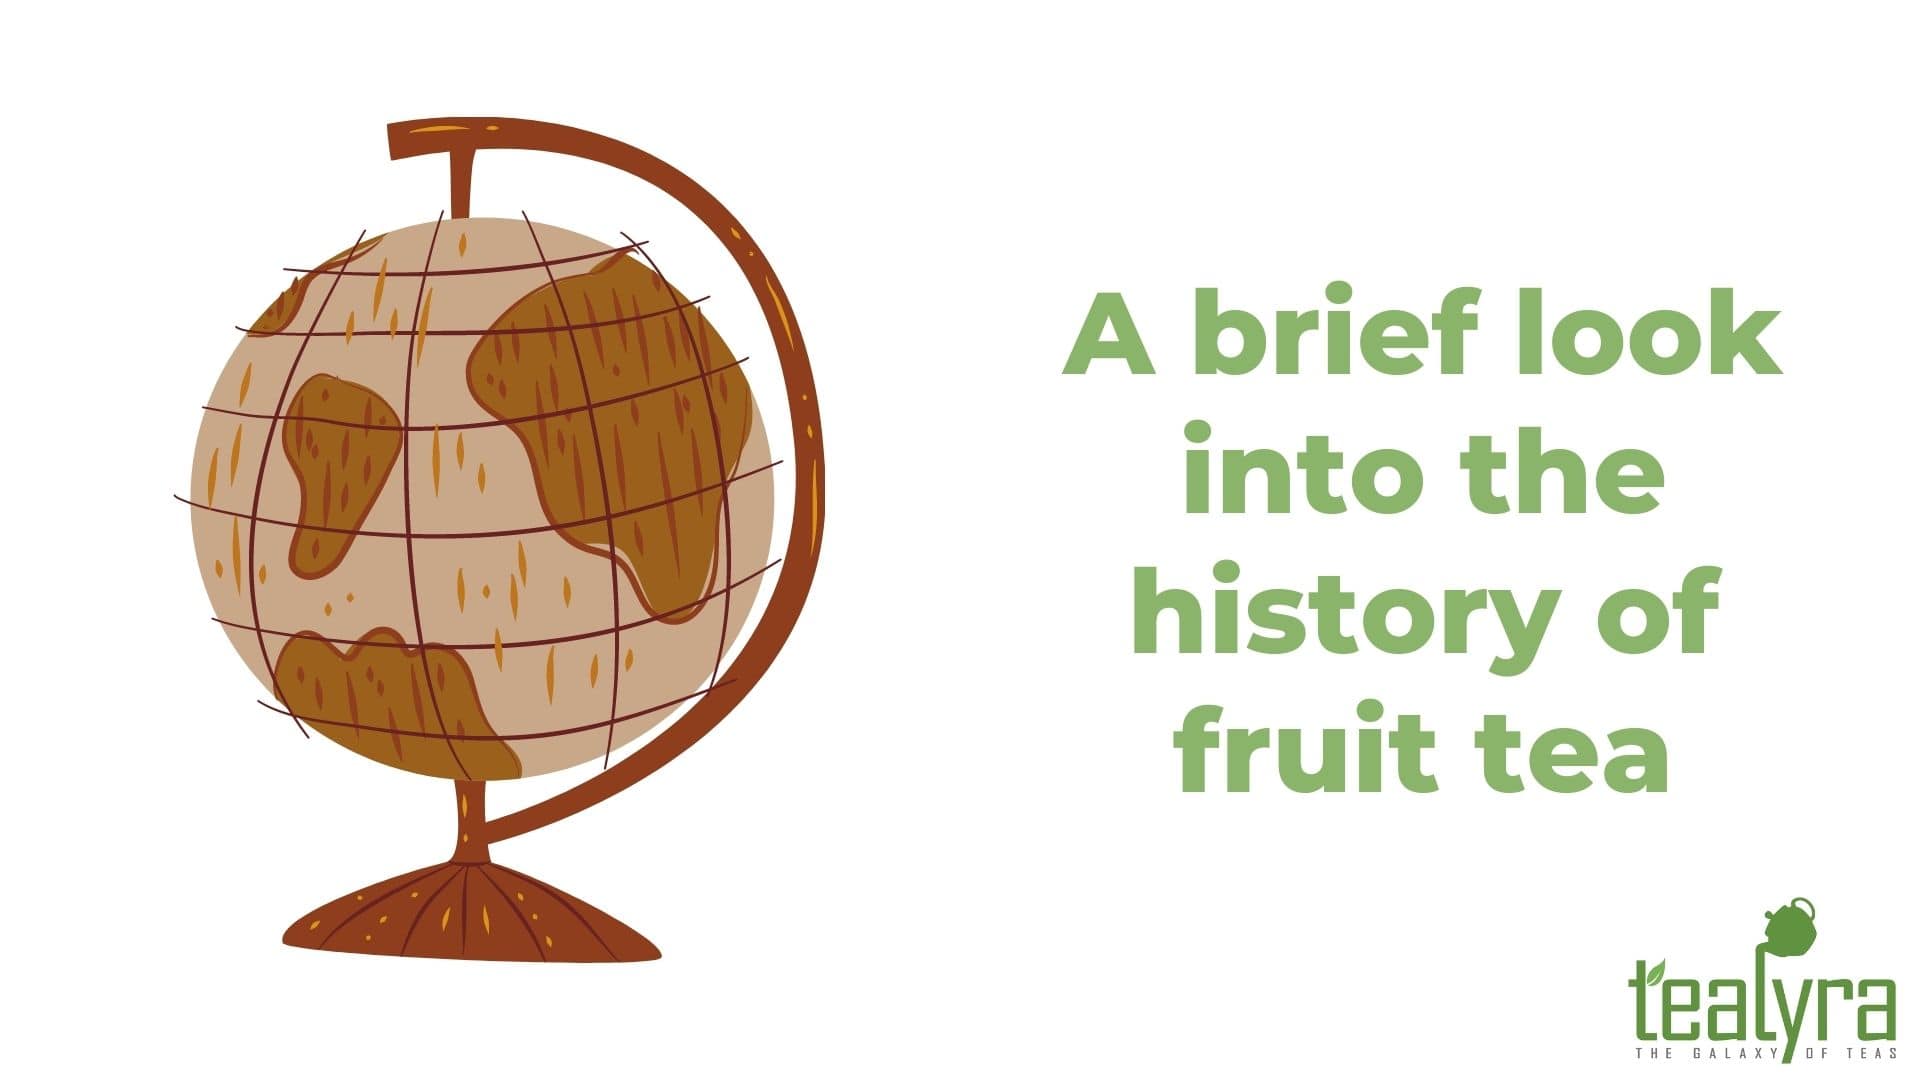 image-a-brief-look-into-the-history-of-fruit-tea